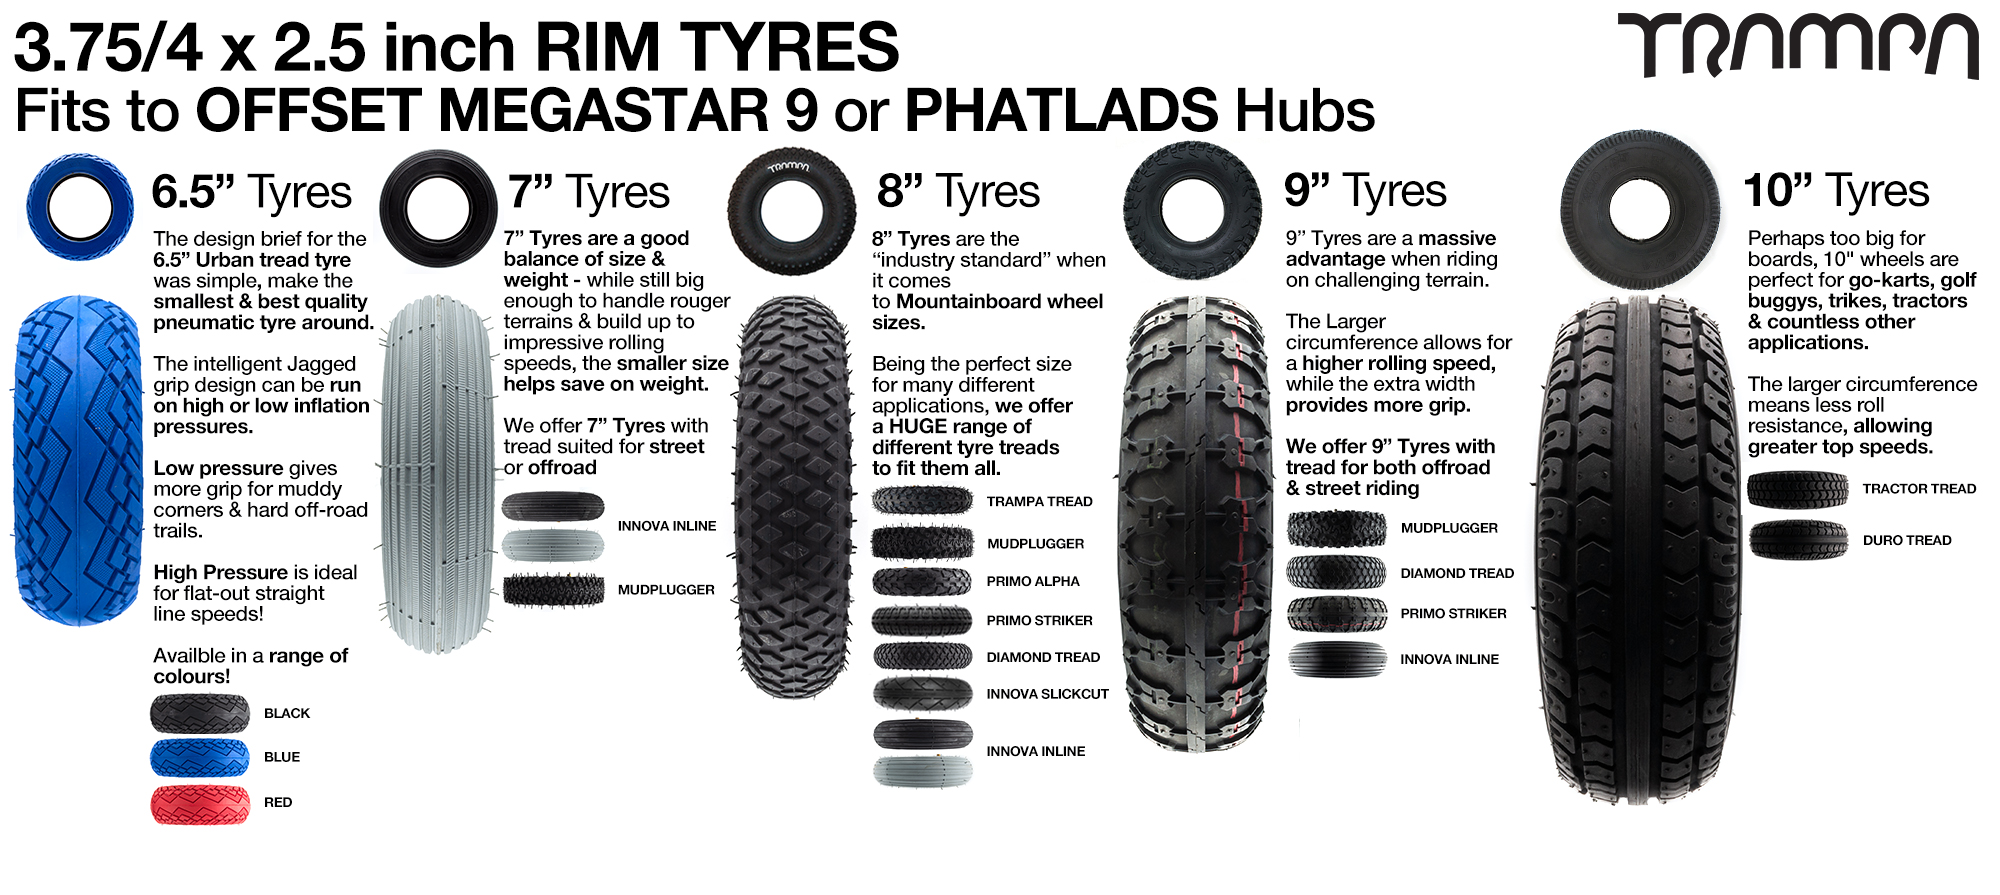 TRAMPA Tyre options for 3.75/4 x 2.5 Inch Rims includes 6 Inch URBANS, 7 Inch Tyres, All 8 inch Tyres, All 9 Inch tyres & all 10 Inch Tyres